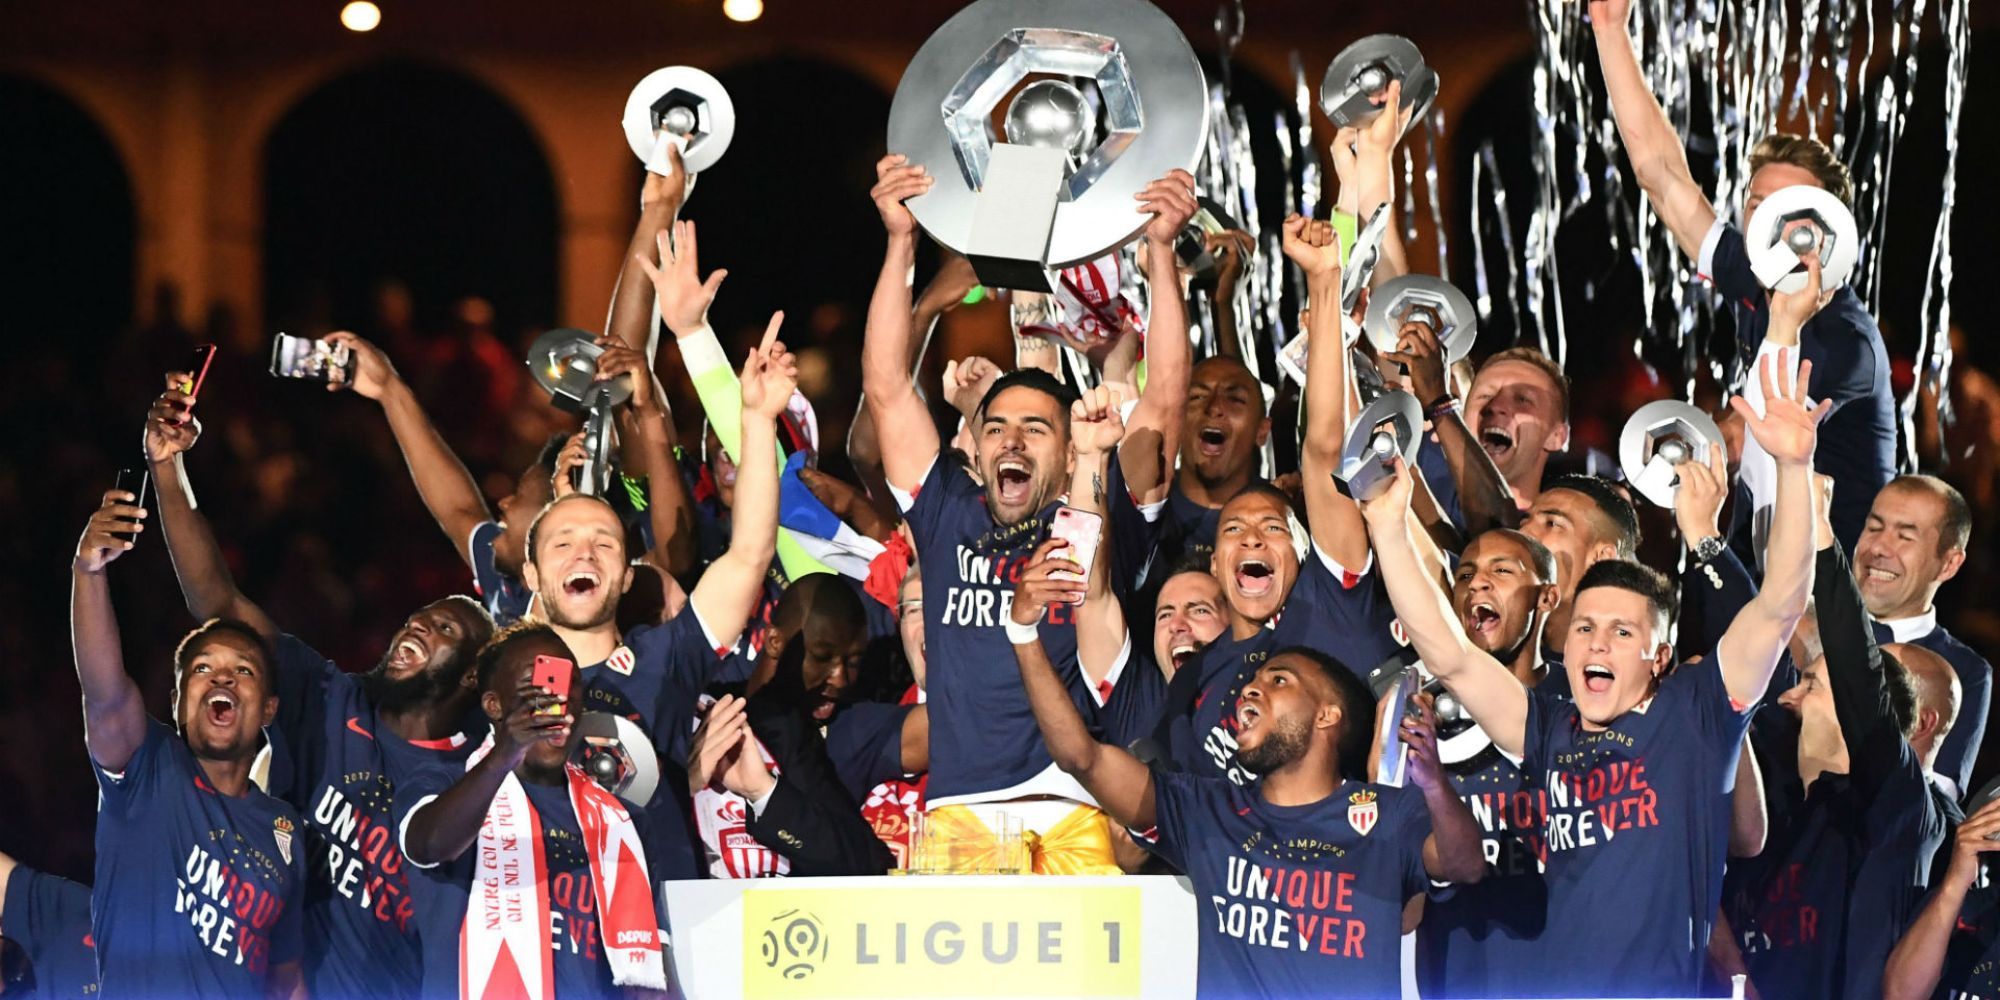 AS Monaco won Ligue 1 won in 2017, can they return to glory?